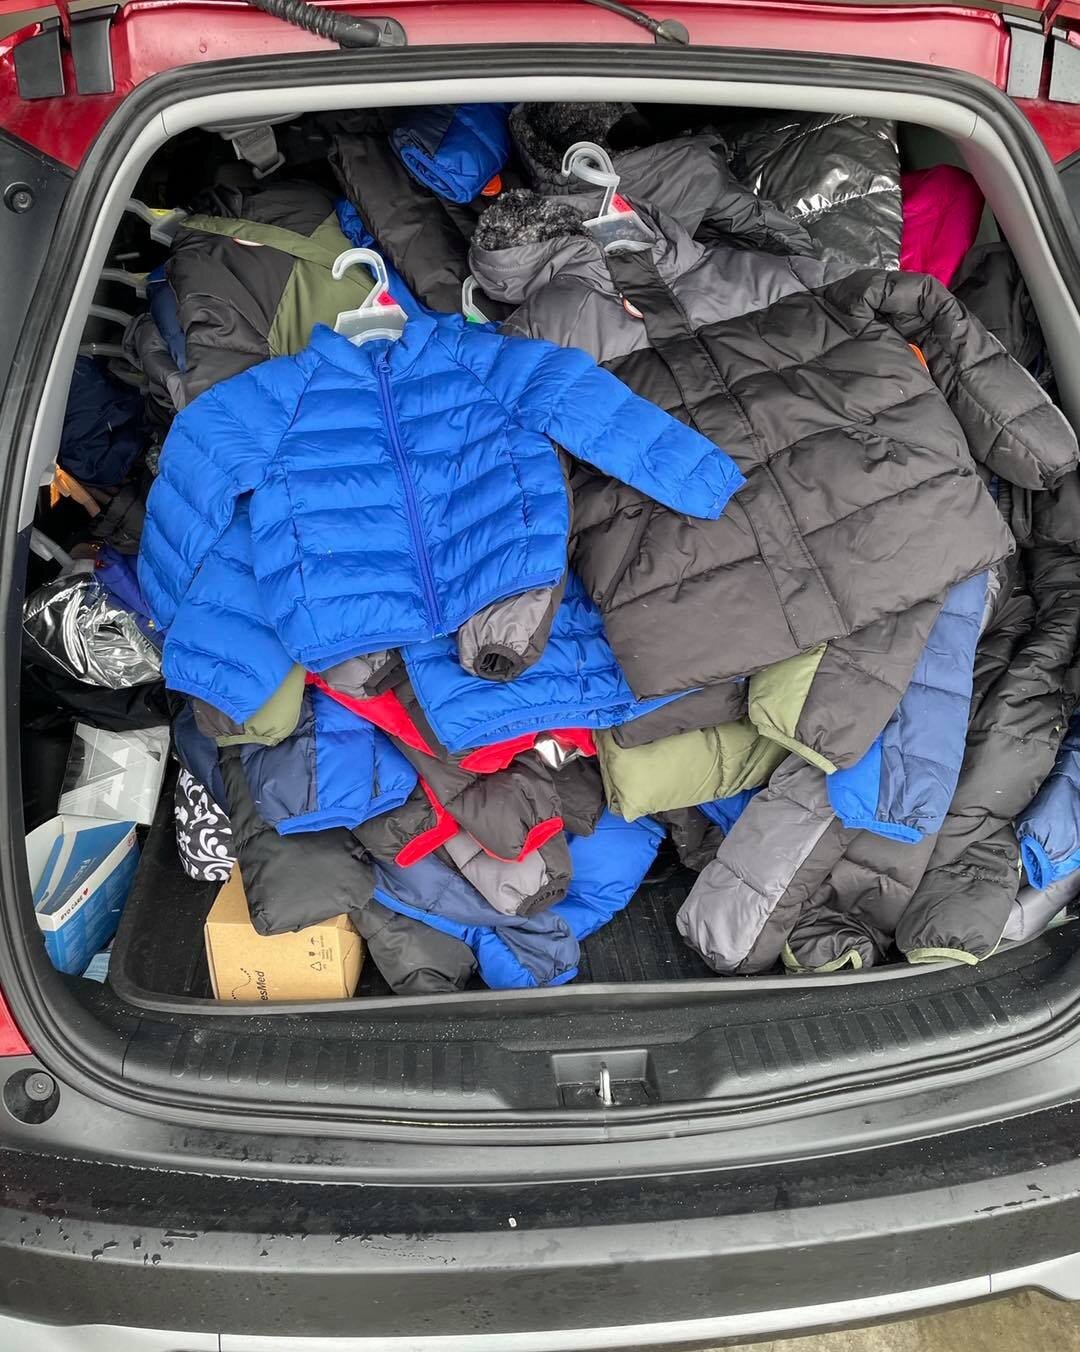 Wow! 🤩 Now that&rsquo;s a full trunk!

We are extending our heartfelt thanks to the Wasserman family for this very generous donation of a trunk full of brand new coats for our children. 

THANK YOU so much, your generosity is so deeply appreciated.